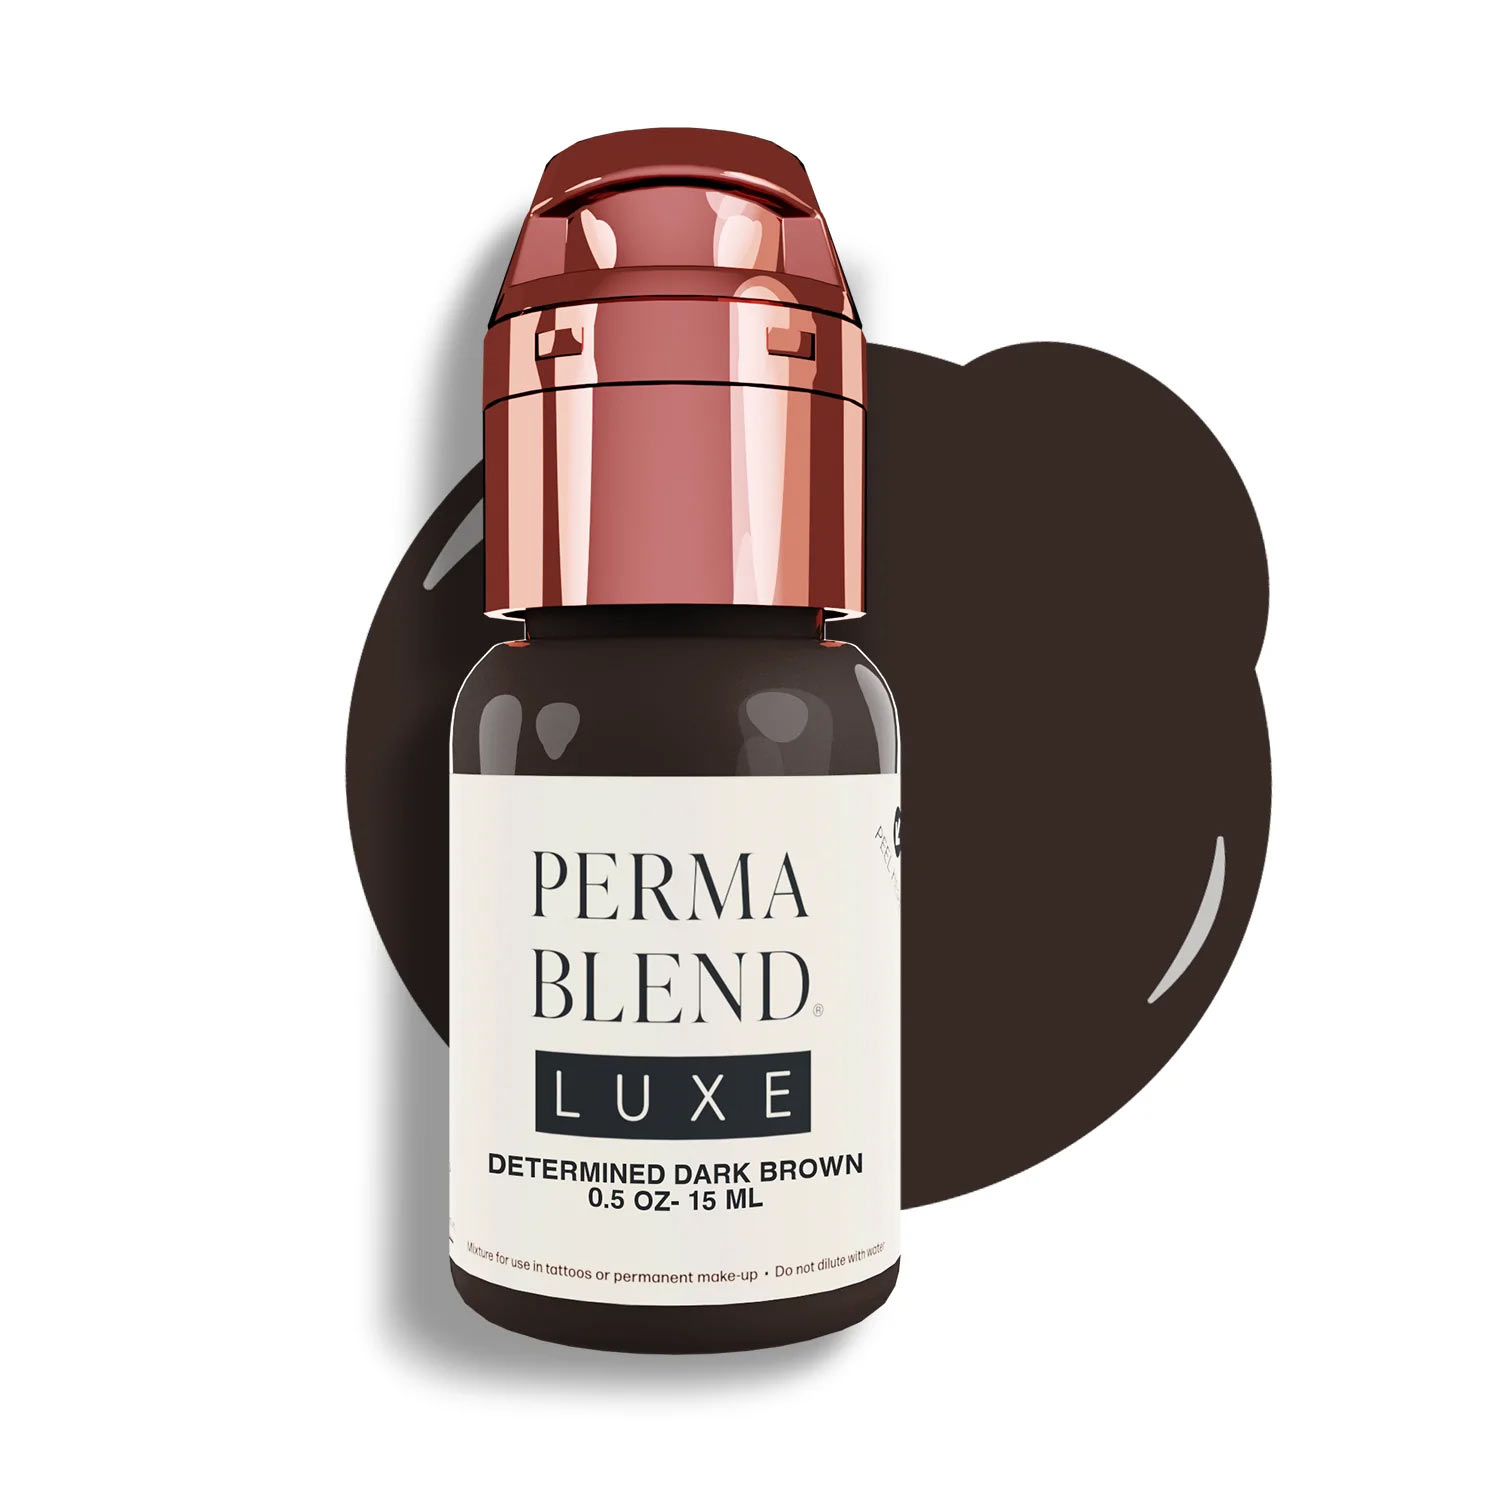 Perma Blend Luxe Vicky Martin Determined Dark Brown 15ml